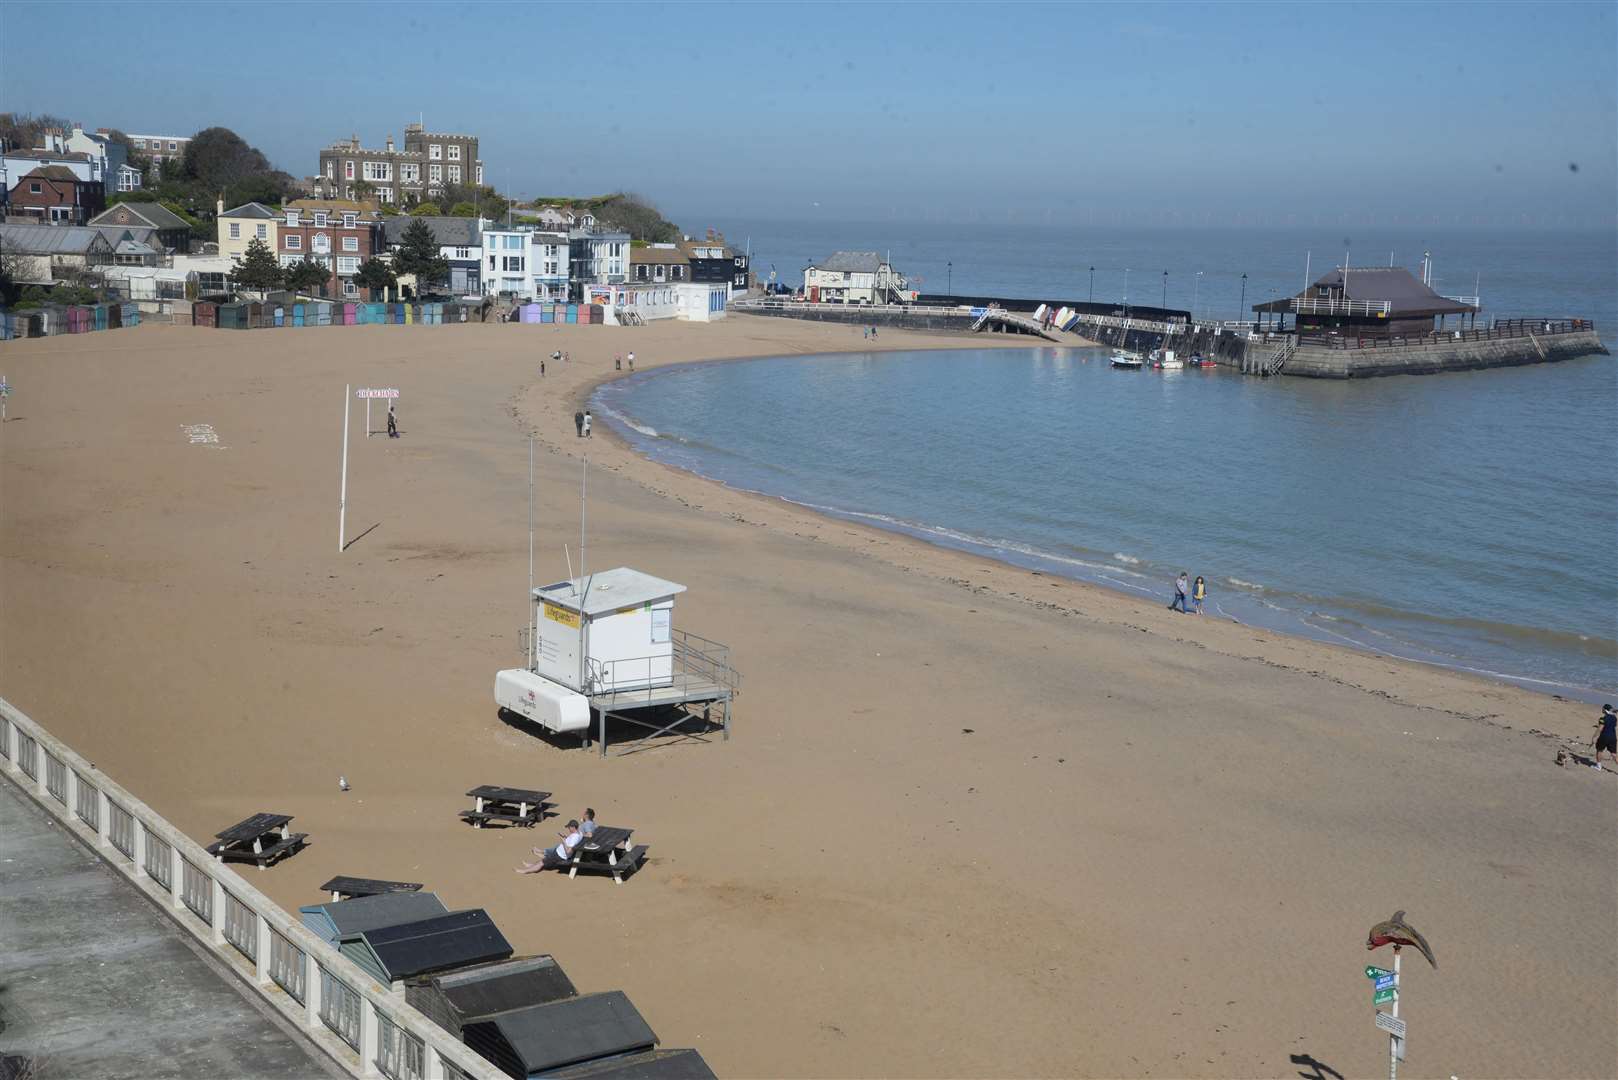 Viking Bay in Broadstairs is one of Thanet's most popular beaches